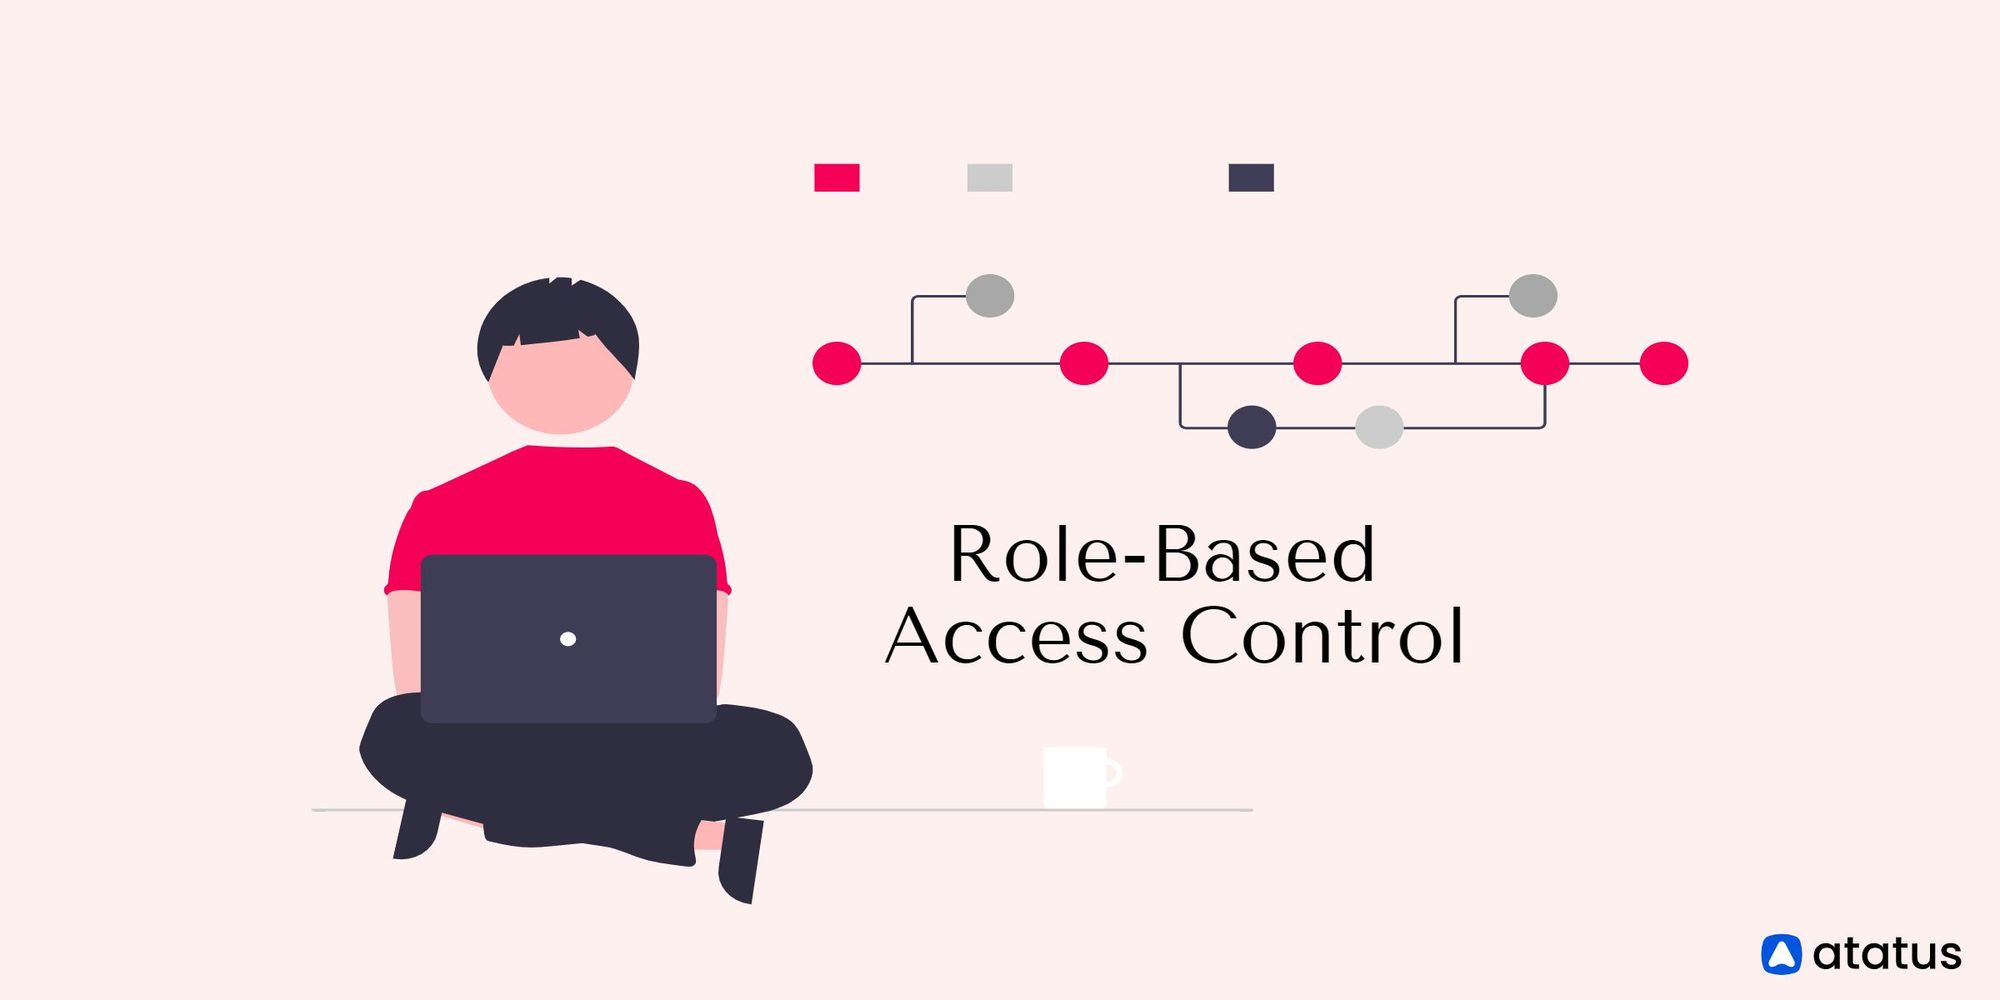 How to control and audit superuser access - On the board